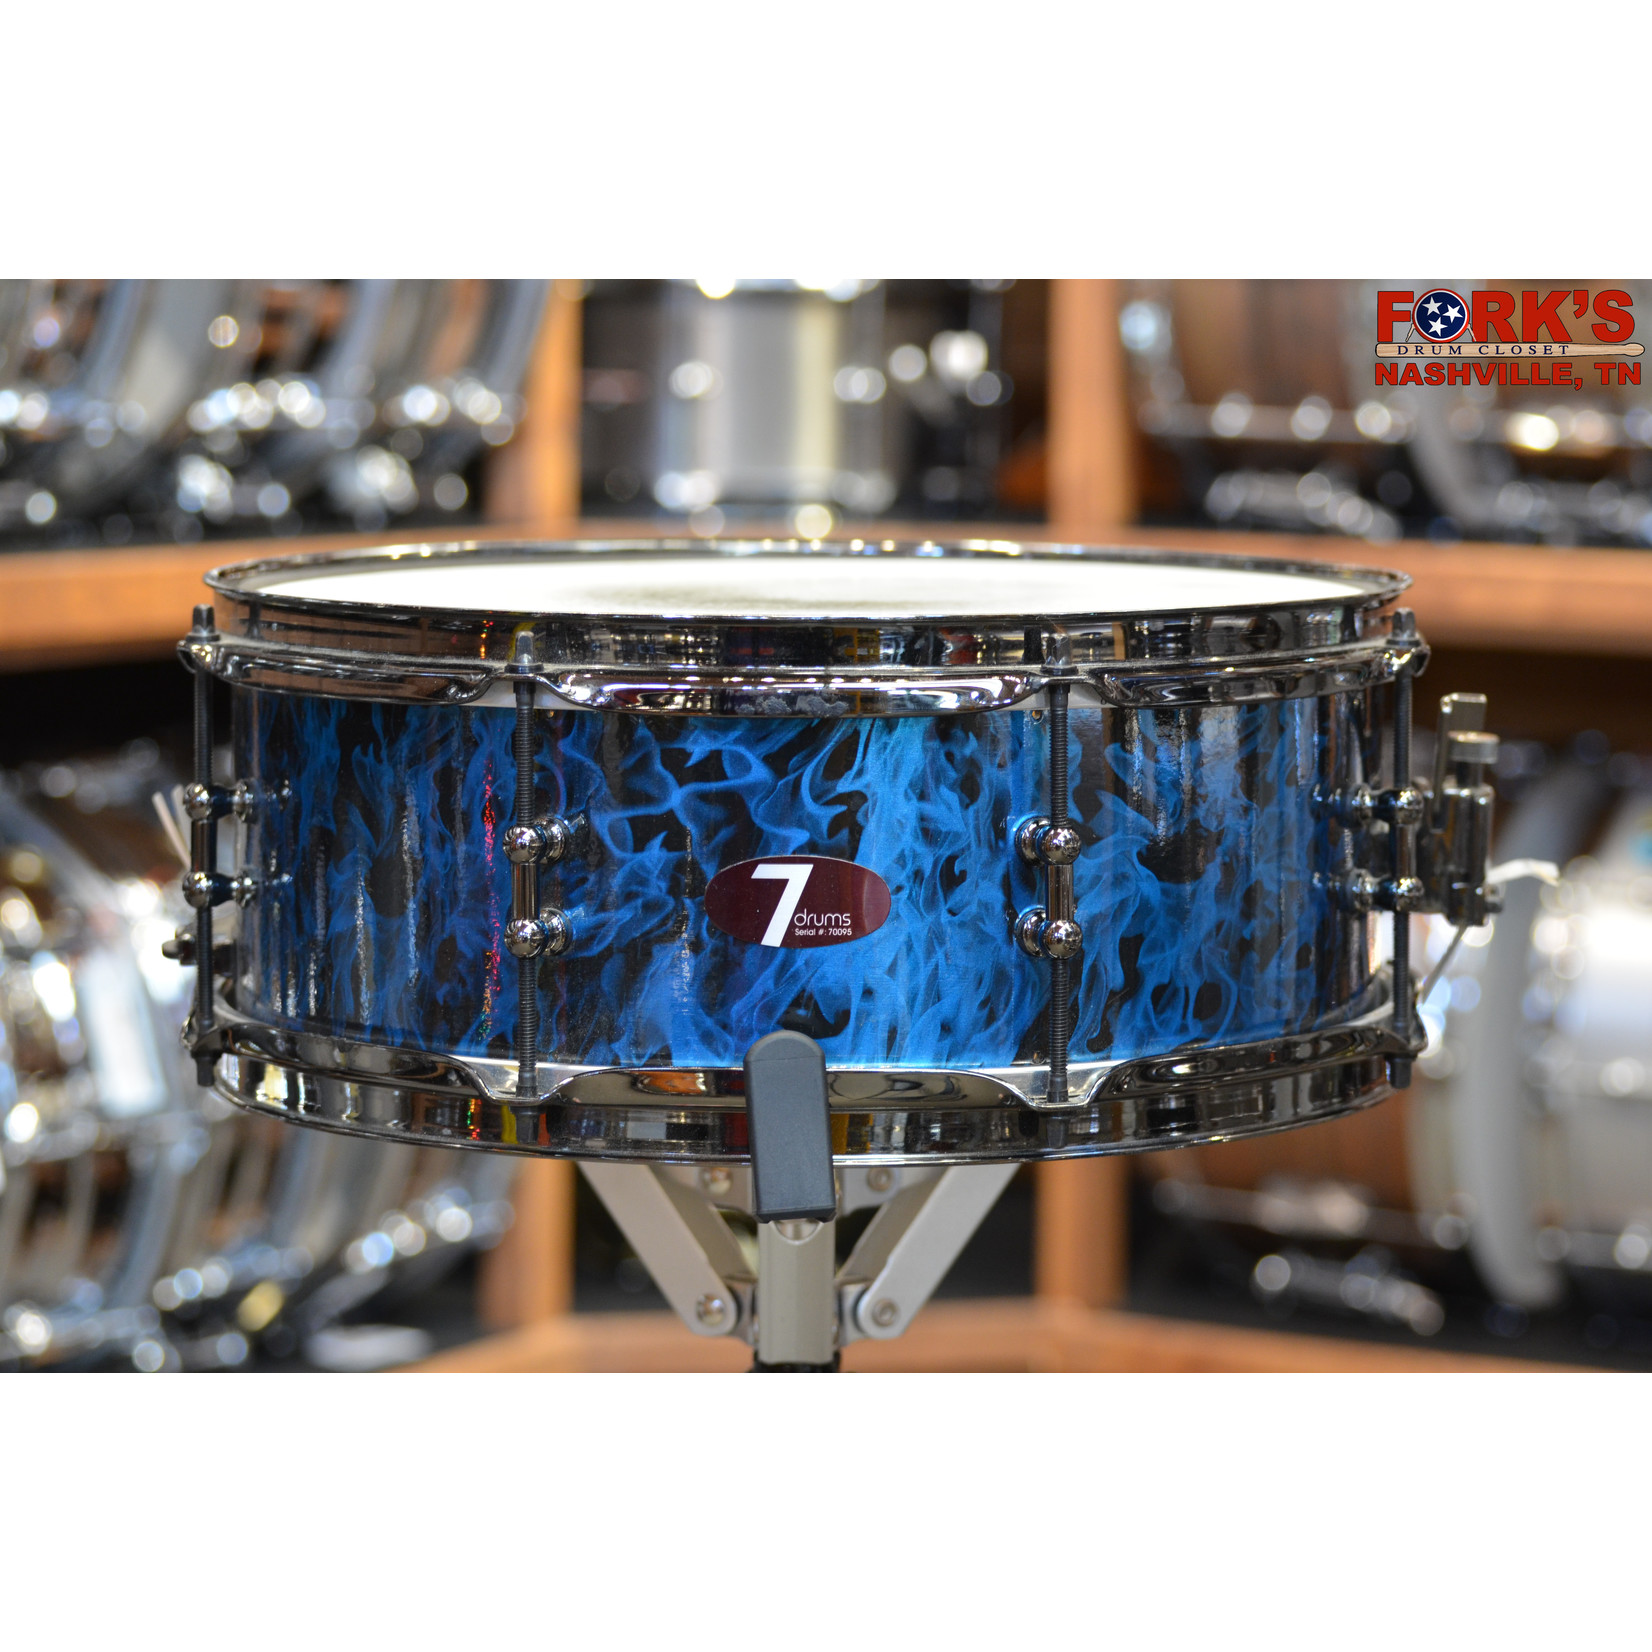 Used 7Drums 5x14 Maple Snare Drum - "Blue Flame Lacquer"